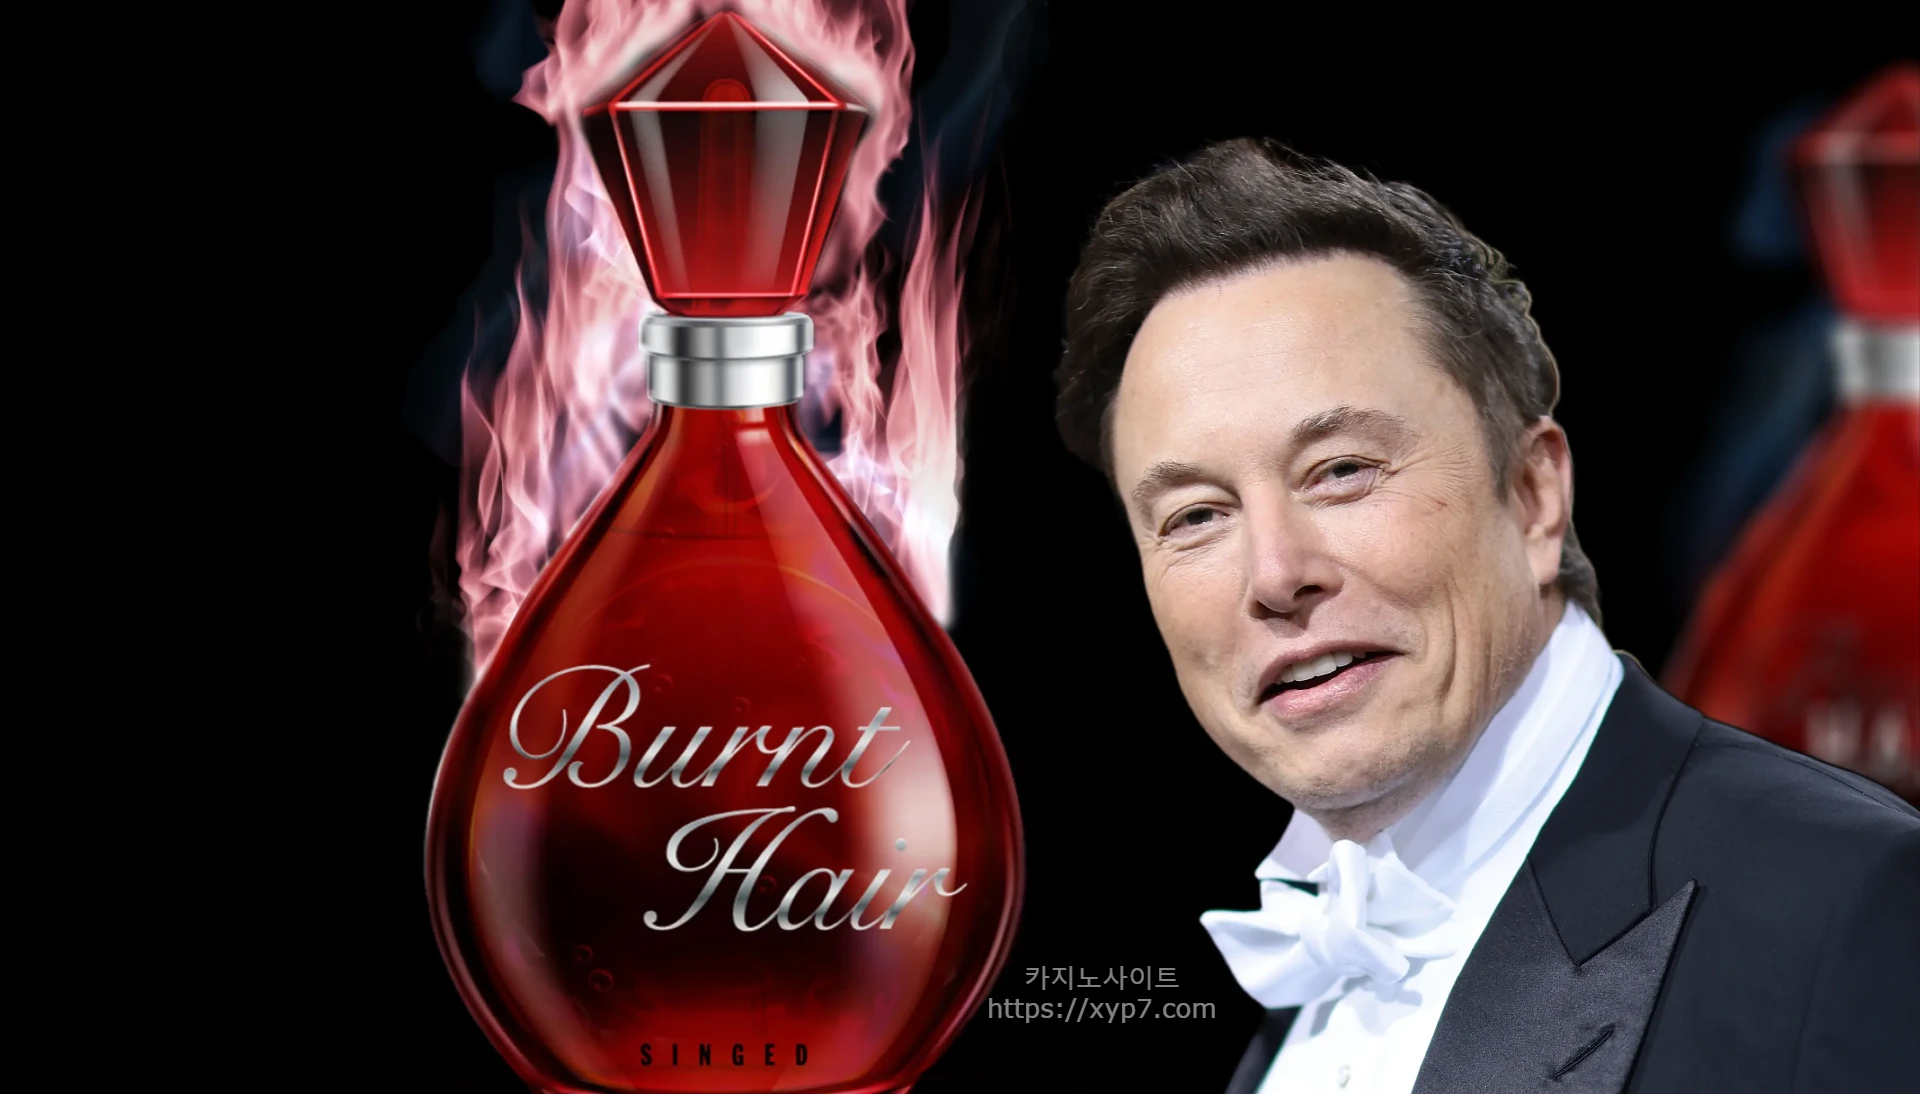 You are currently viewing Elon Musk’s Launches New Perfume Business to Buy Twitter